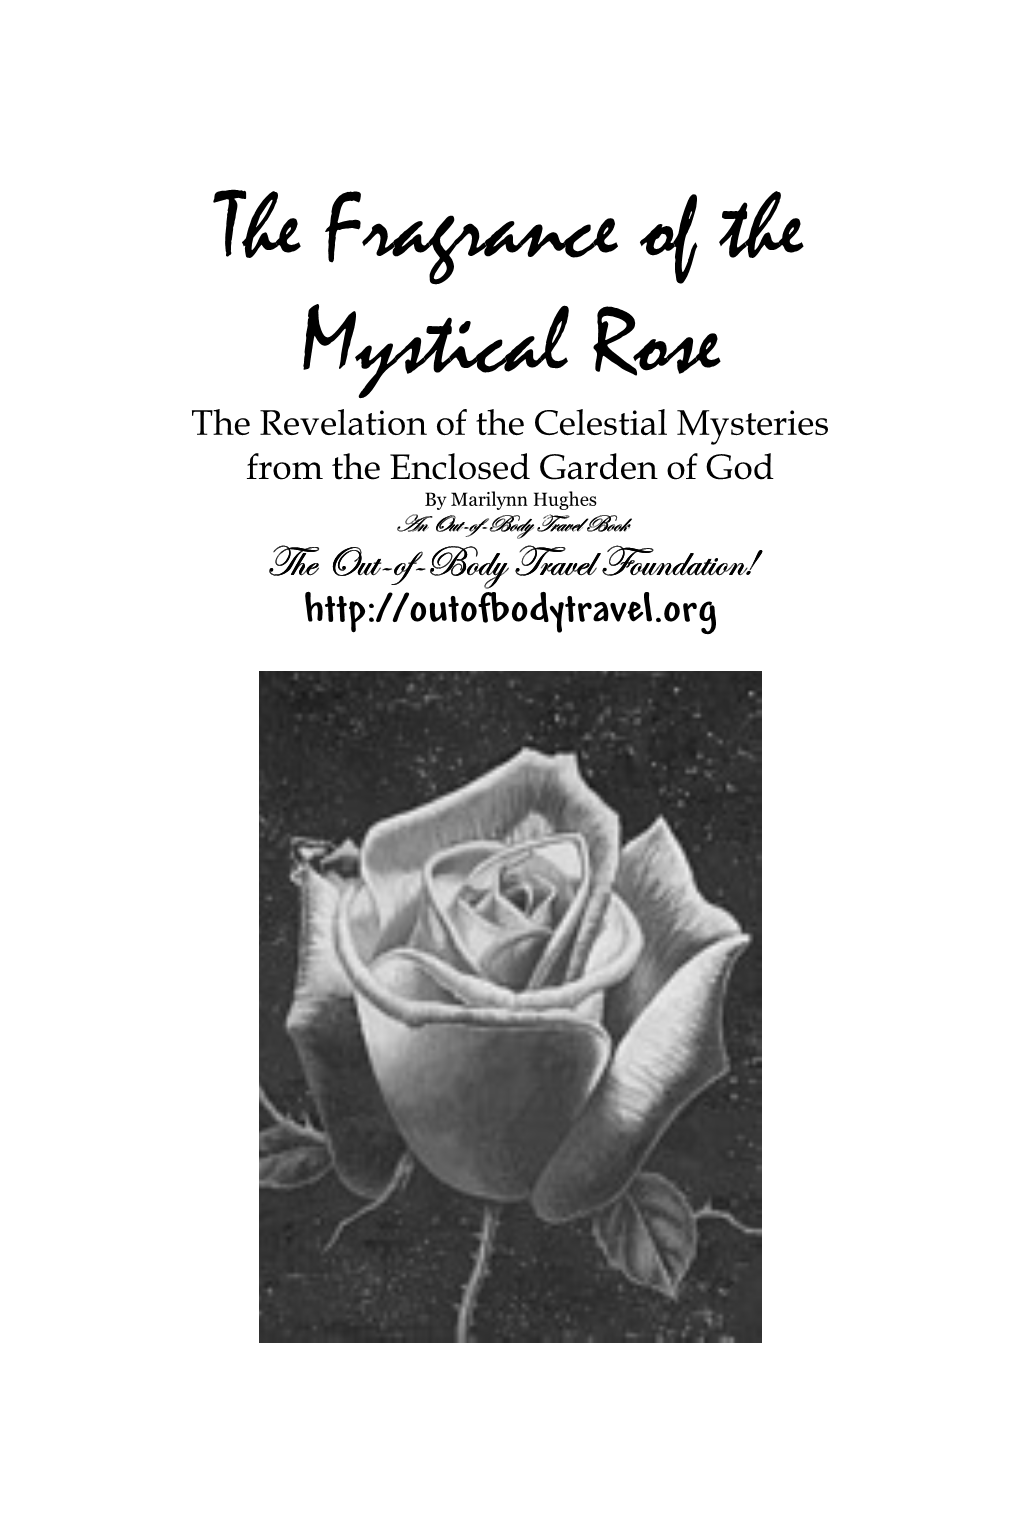 The Fragrance of the Mystical Rose